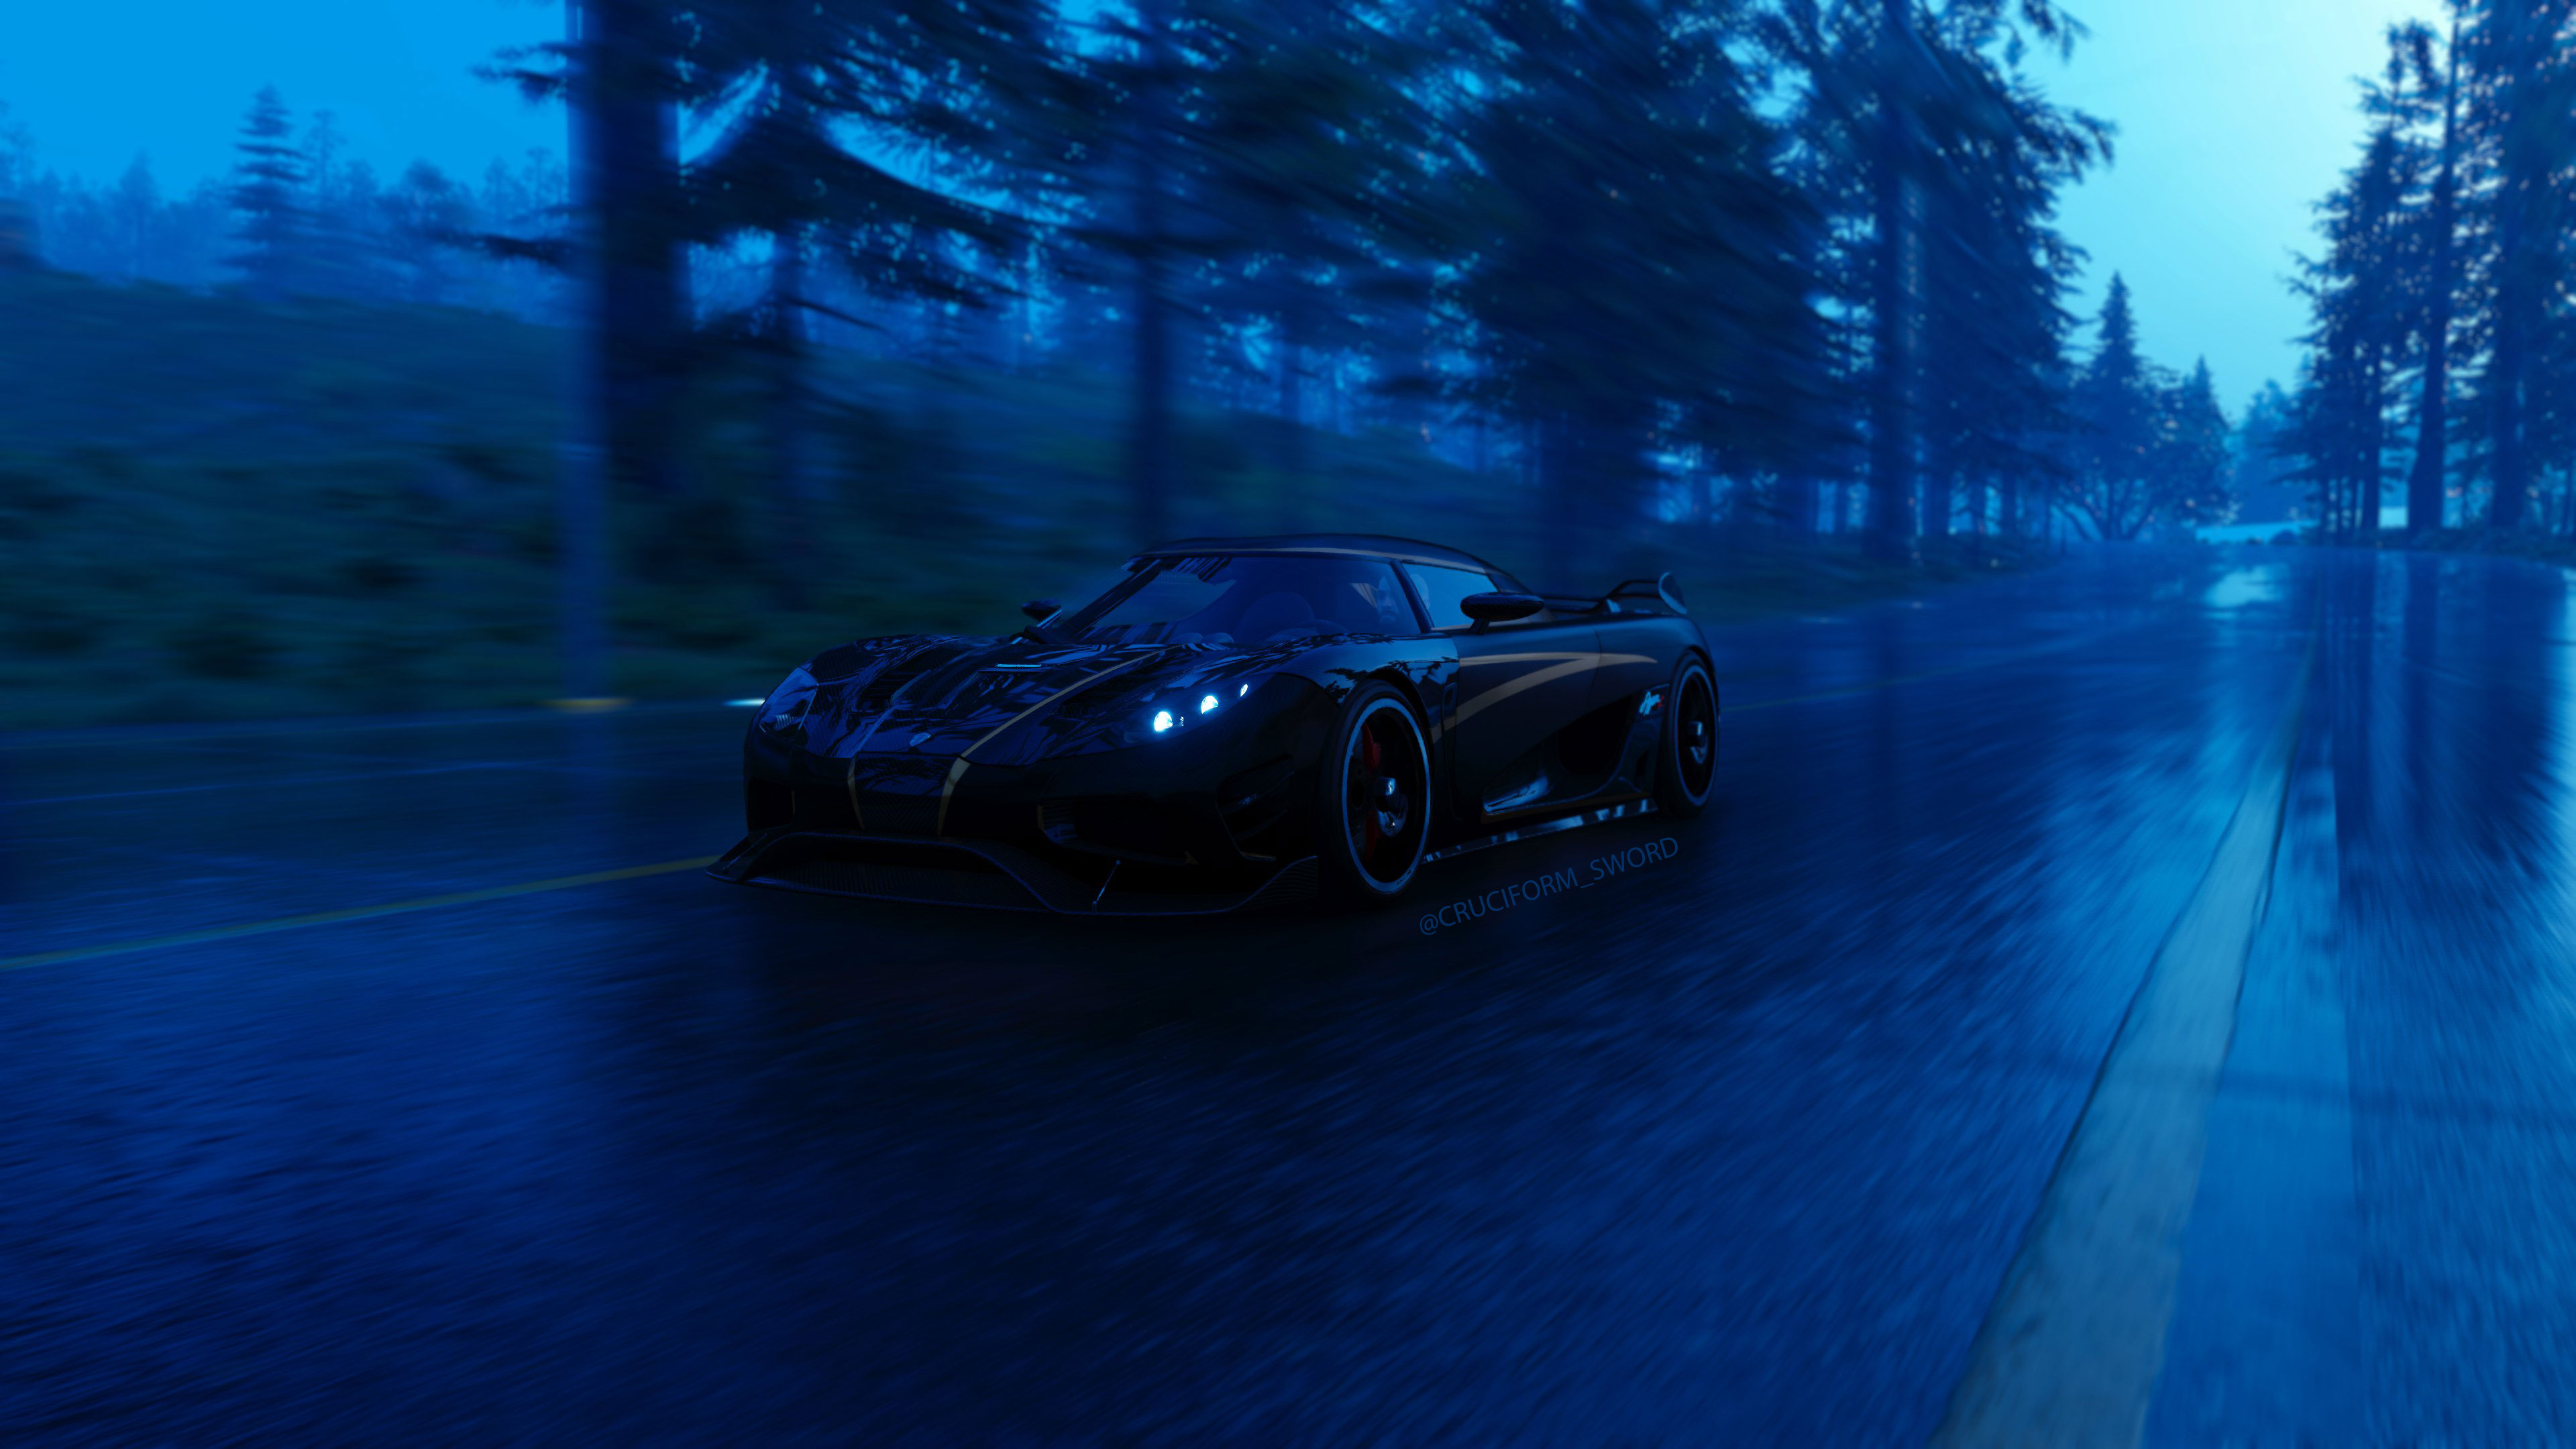 The Crew 2 Video Games Koenigsegg Agera R Supercars Photography PC Gaming Gamewallpapers Screen Shot 3840x2160